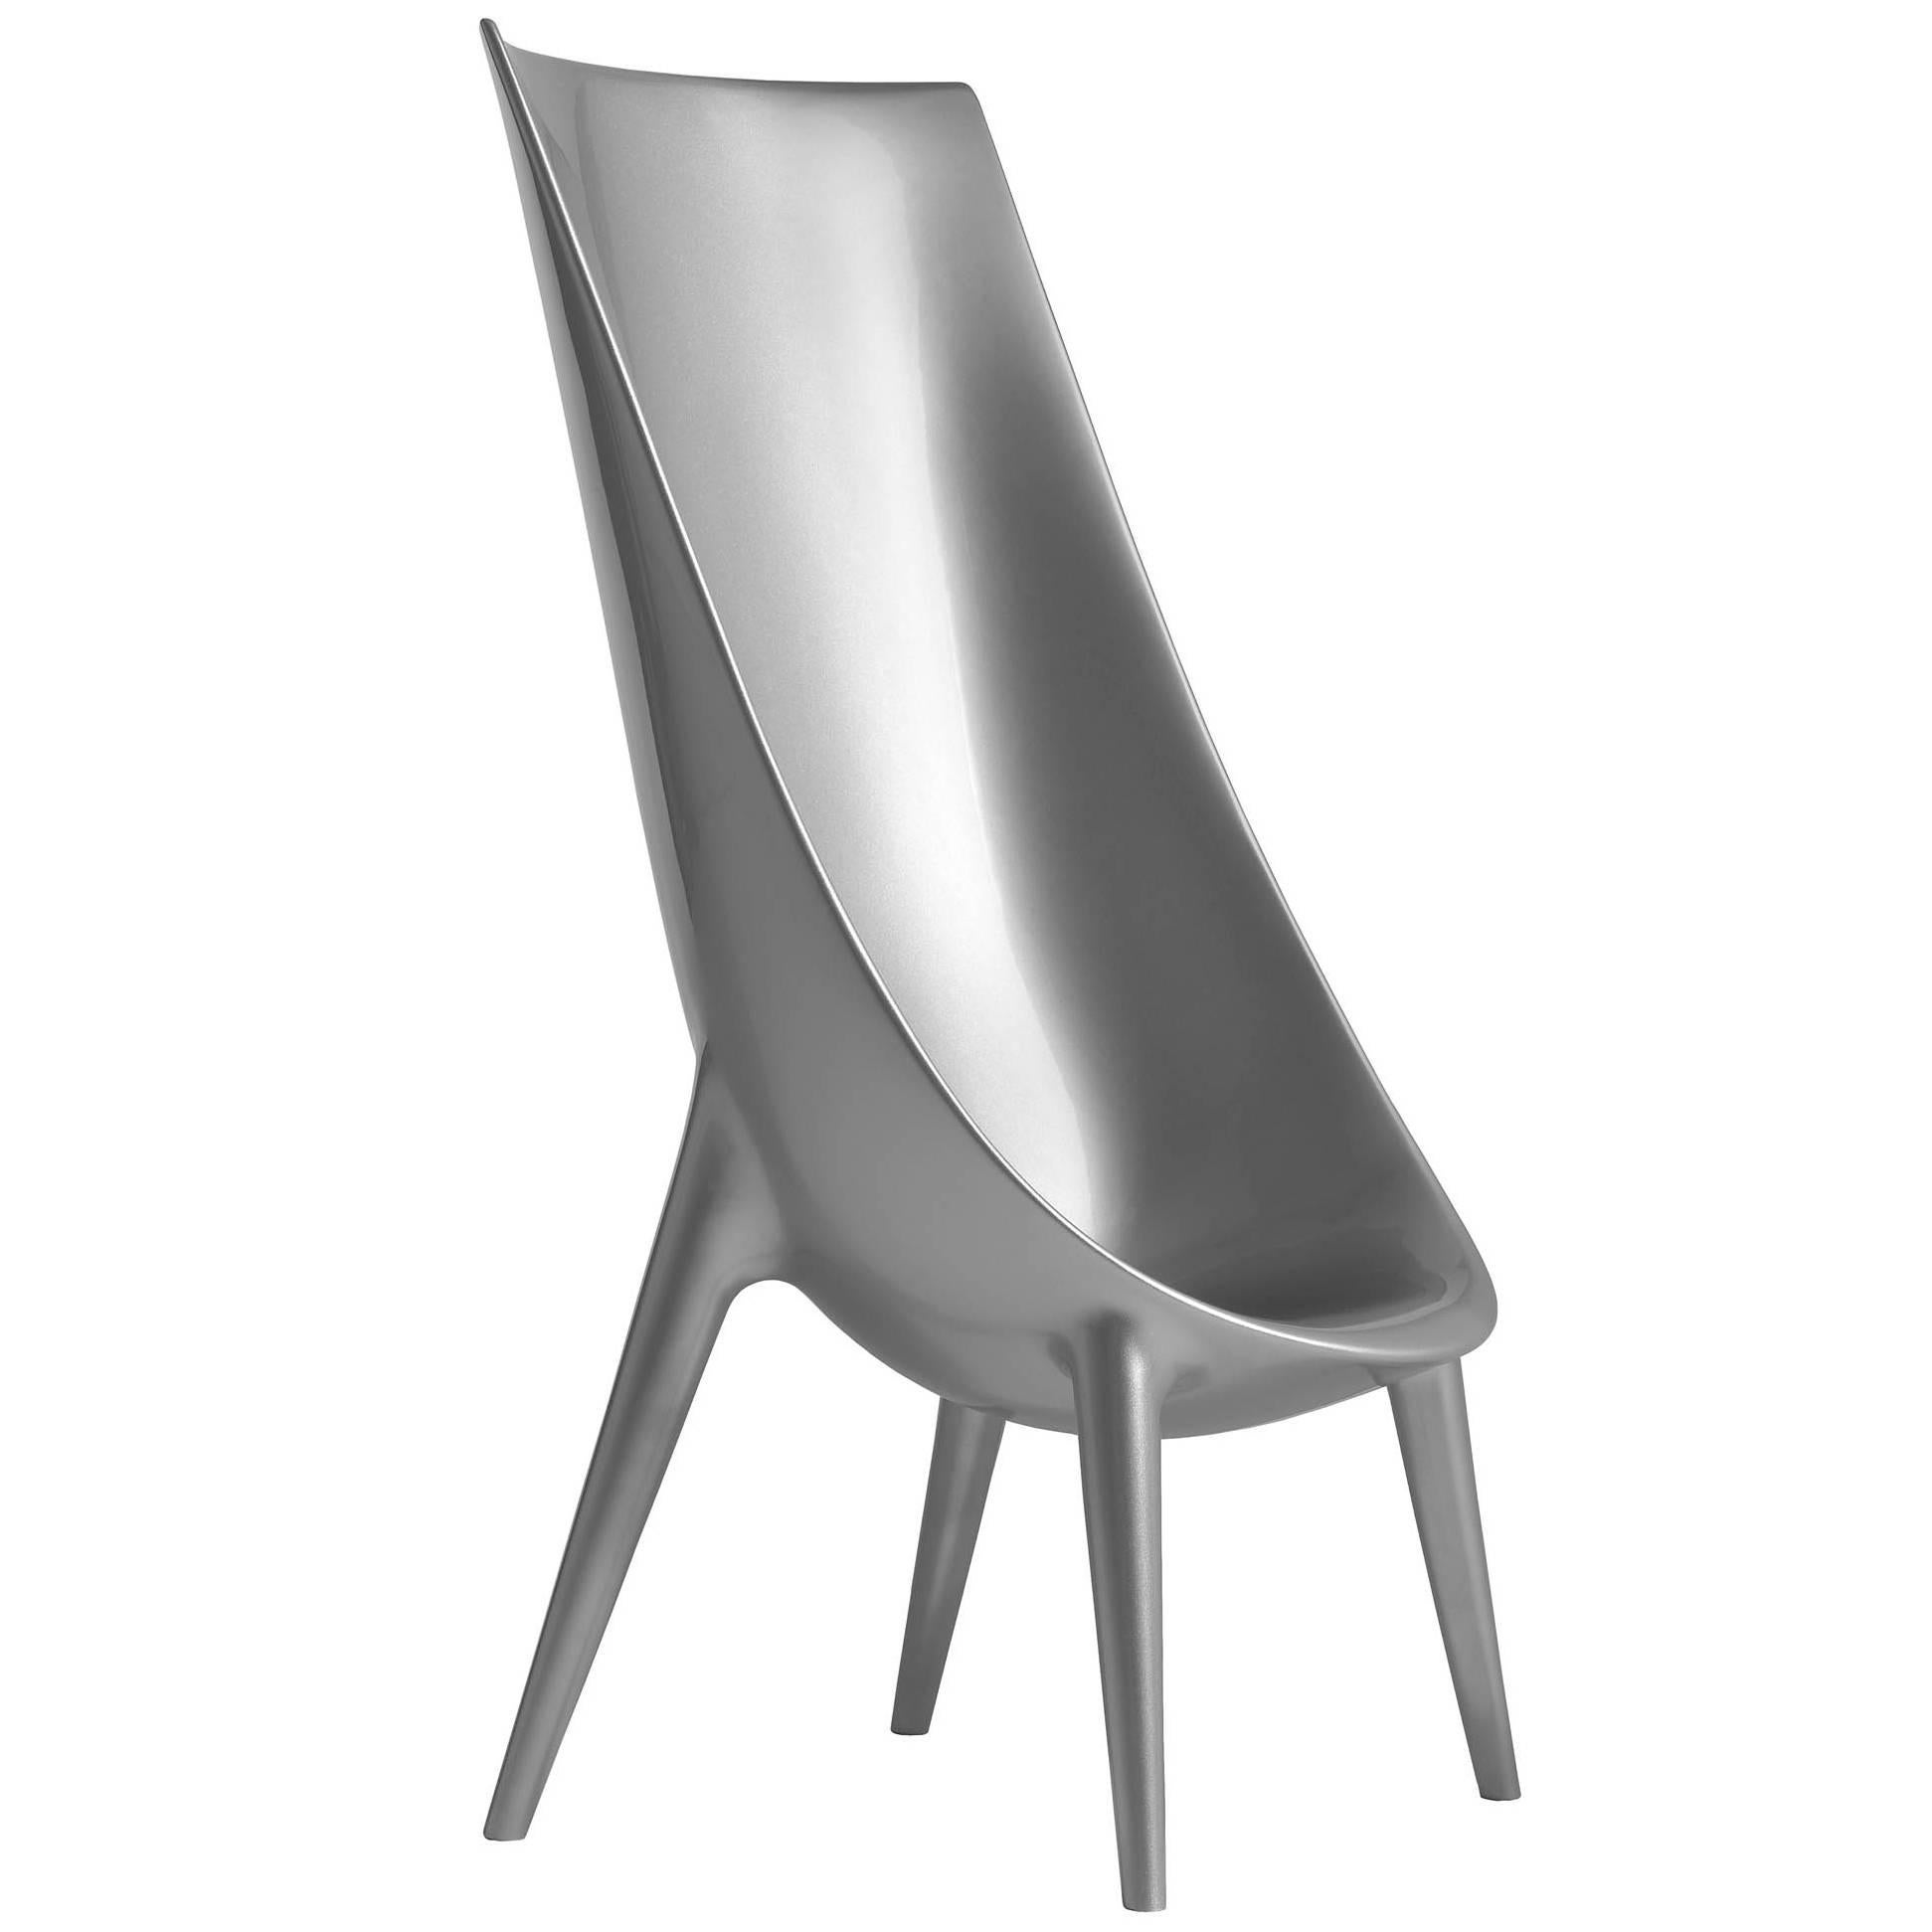 "Out/In" Metallic Silver Gray High Chair by P. Starck & E. Quitllet for Driade For Sale